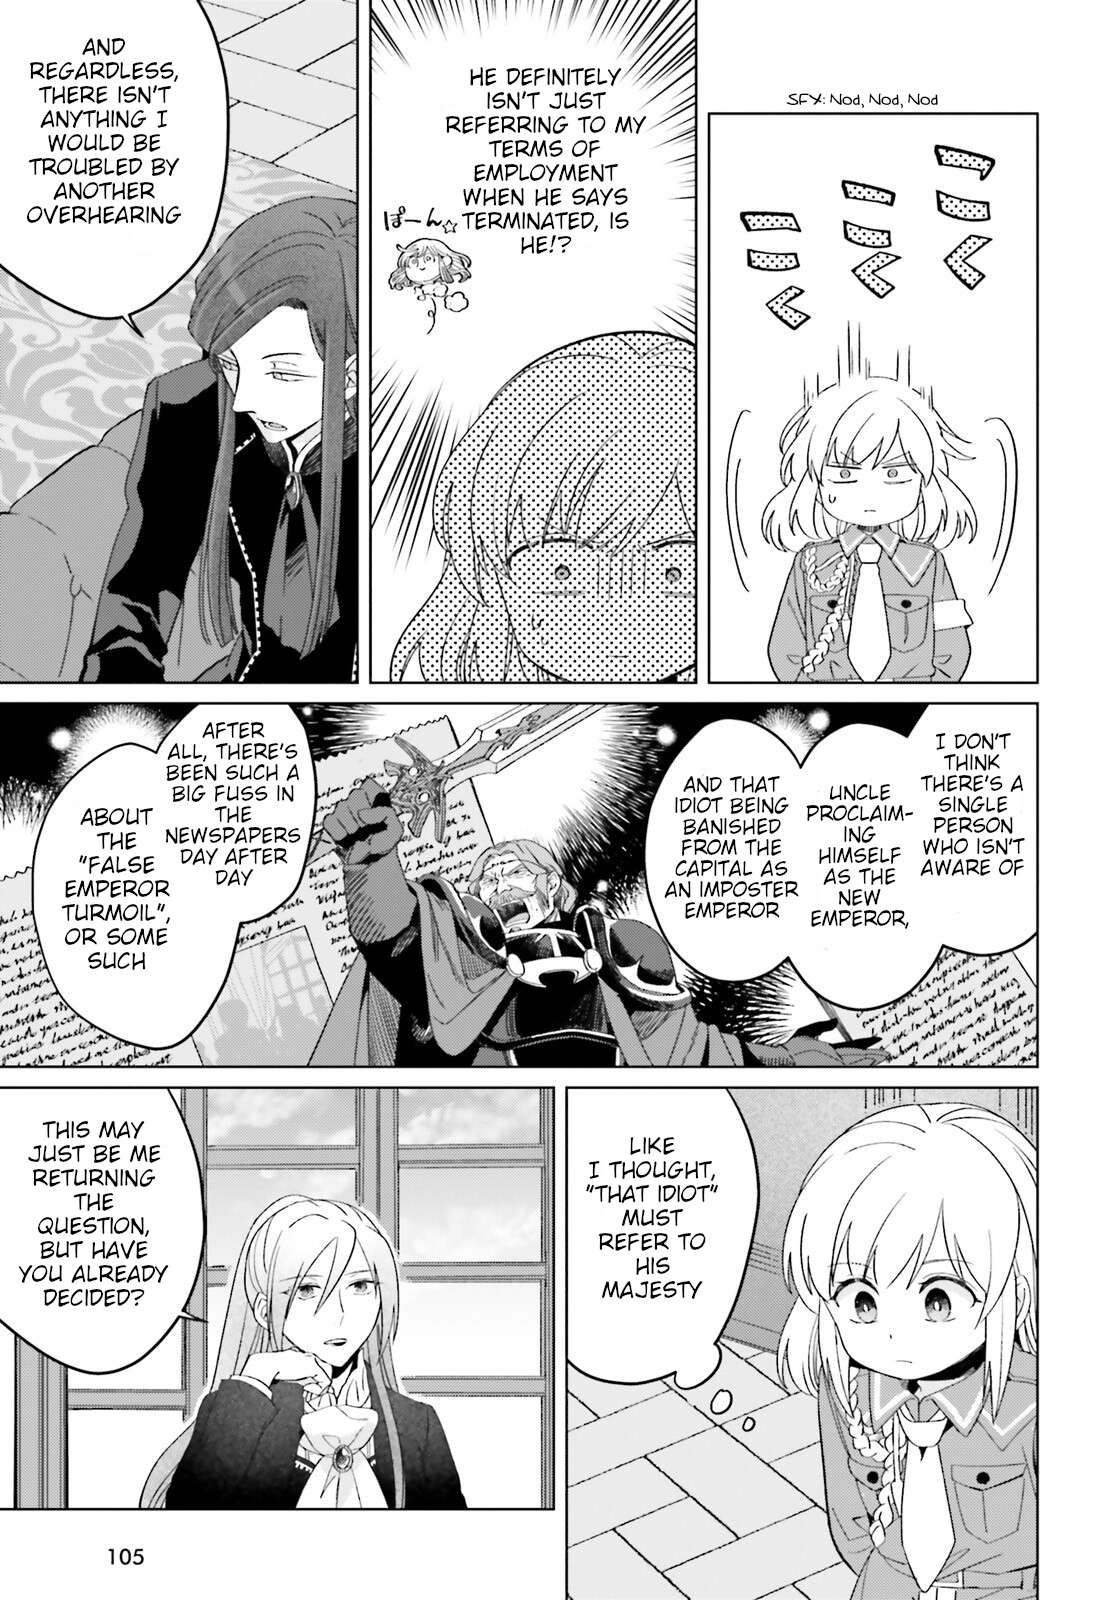 Win Over The Dragon Emperor This Time Around, Noble Girl! - chapter 21 - #3